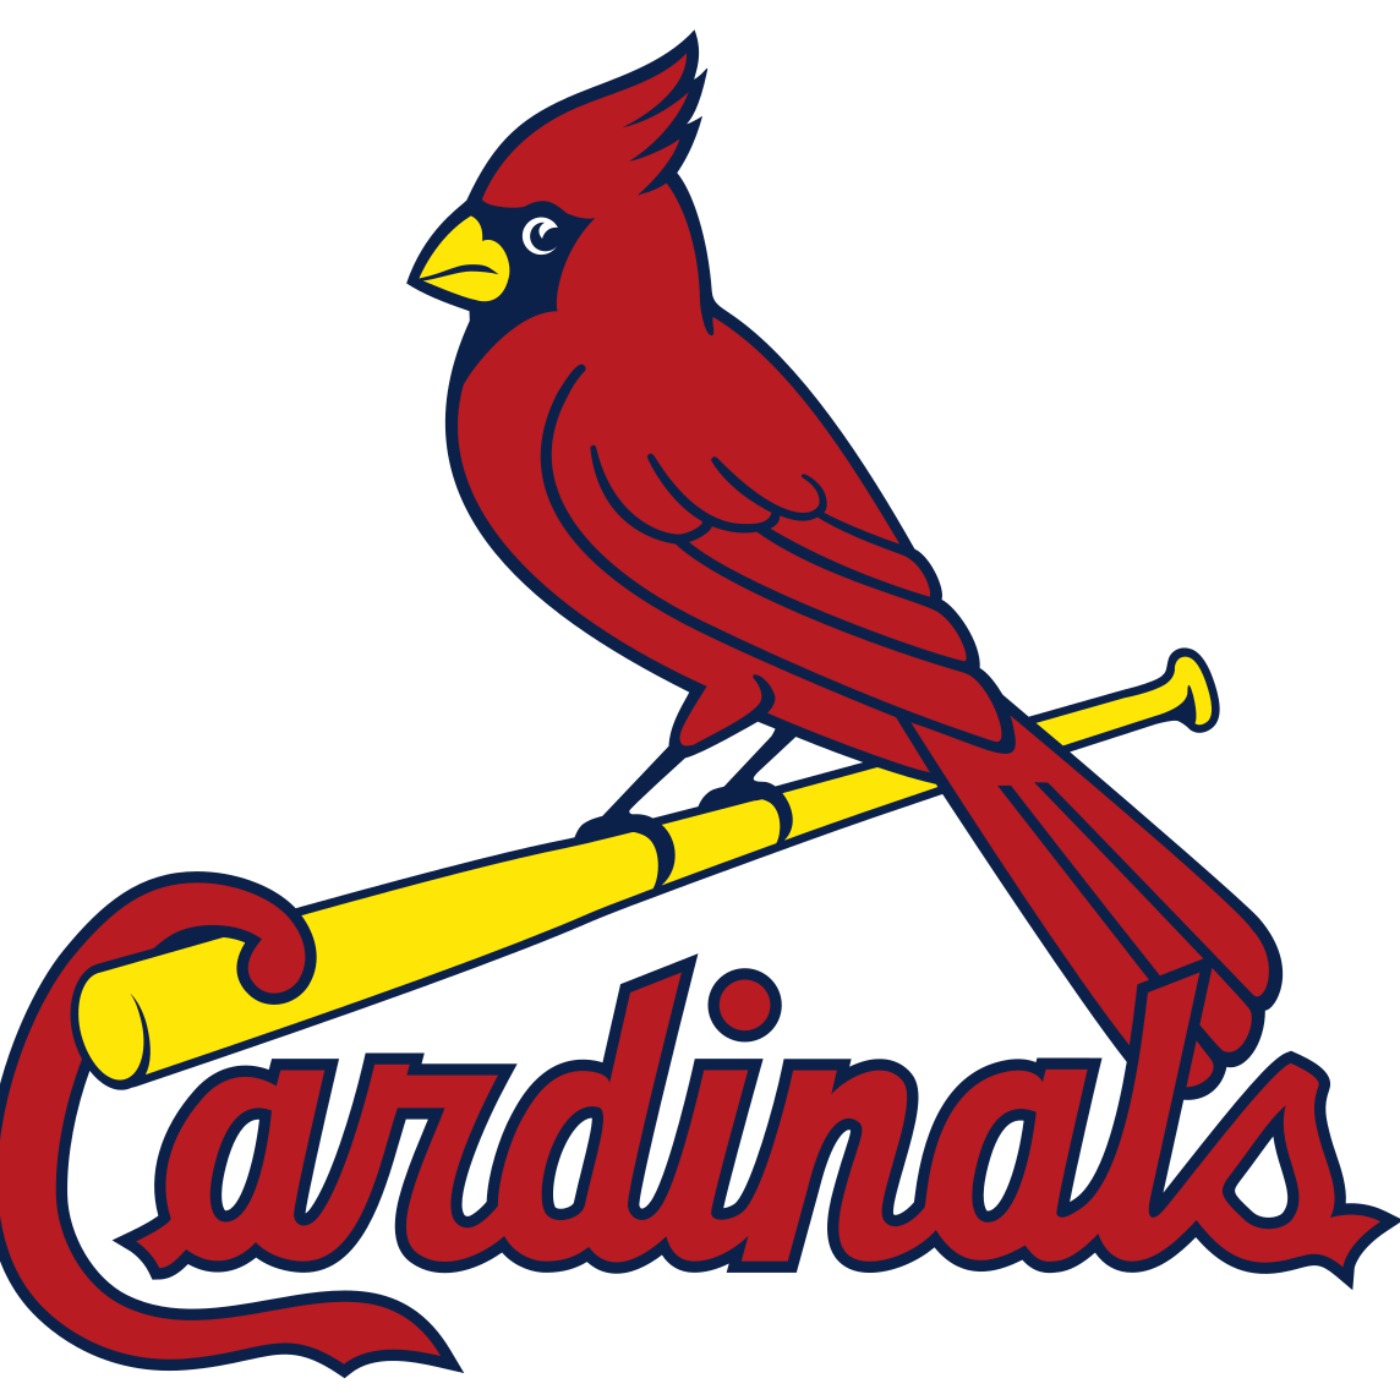 Cardnails made it to post season and open thoughts